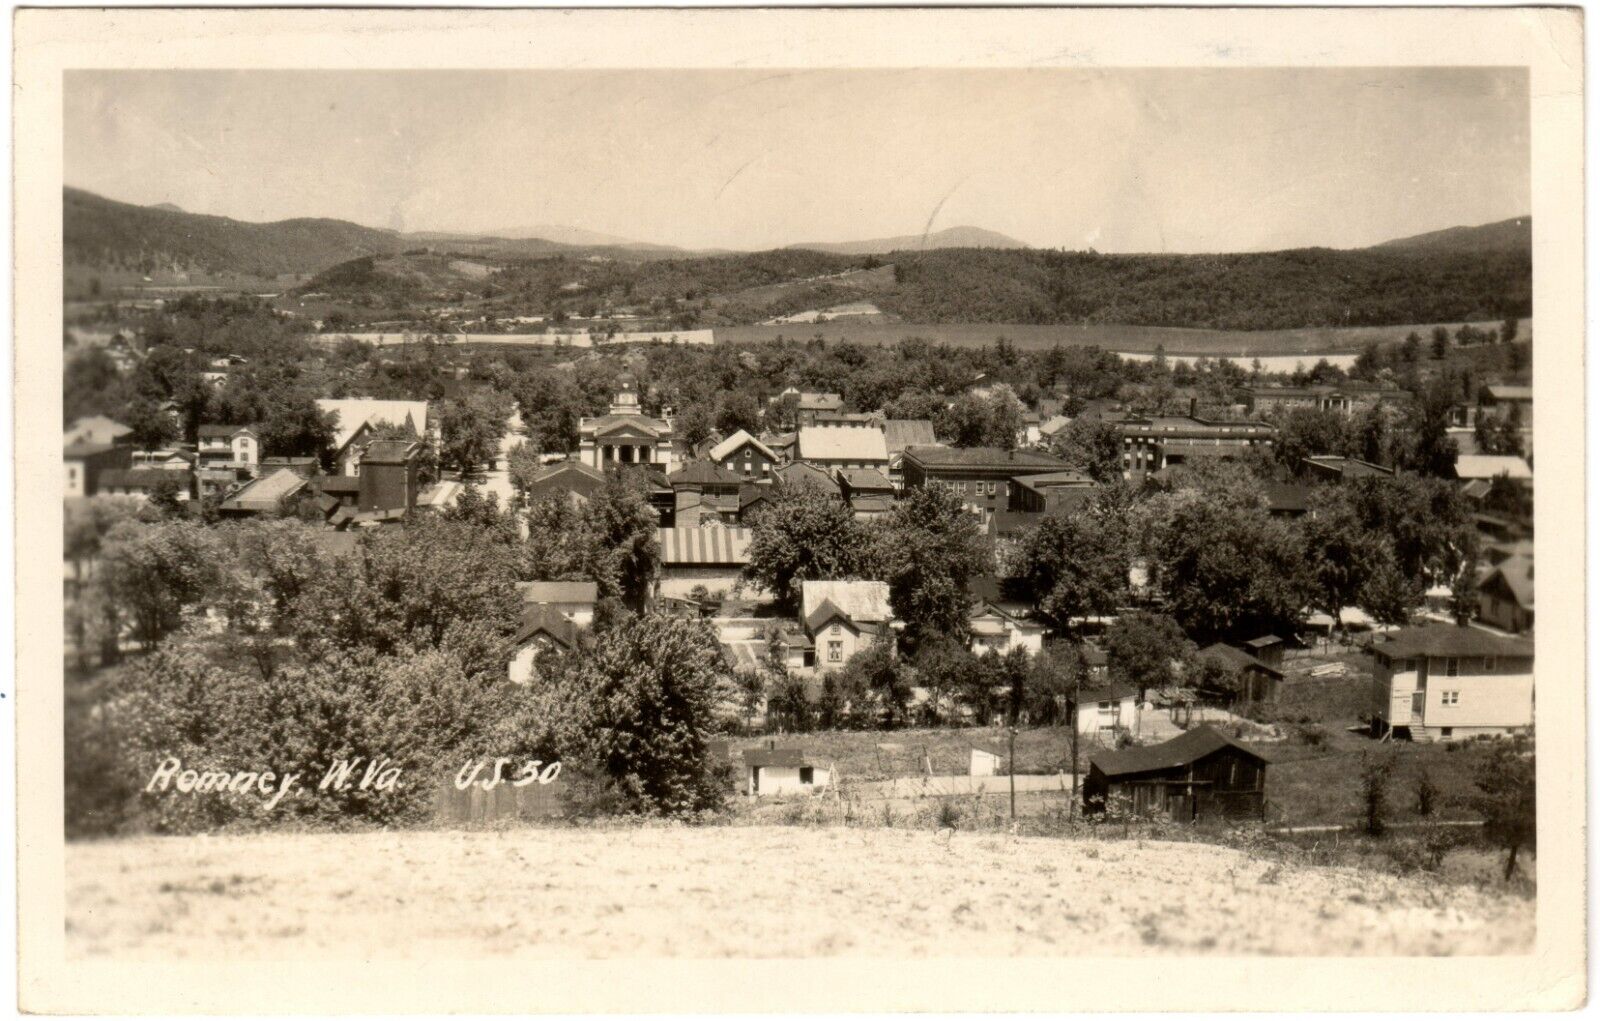 ROMNEY, WV RPPC - Town View, US Route Rt. 50 West Virginia Real Photo Postcard